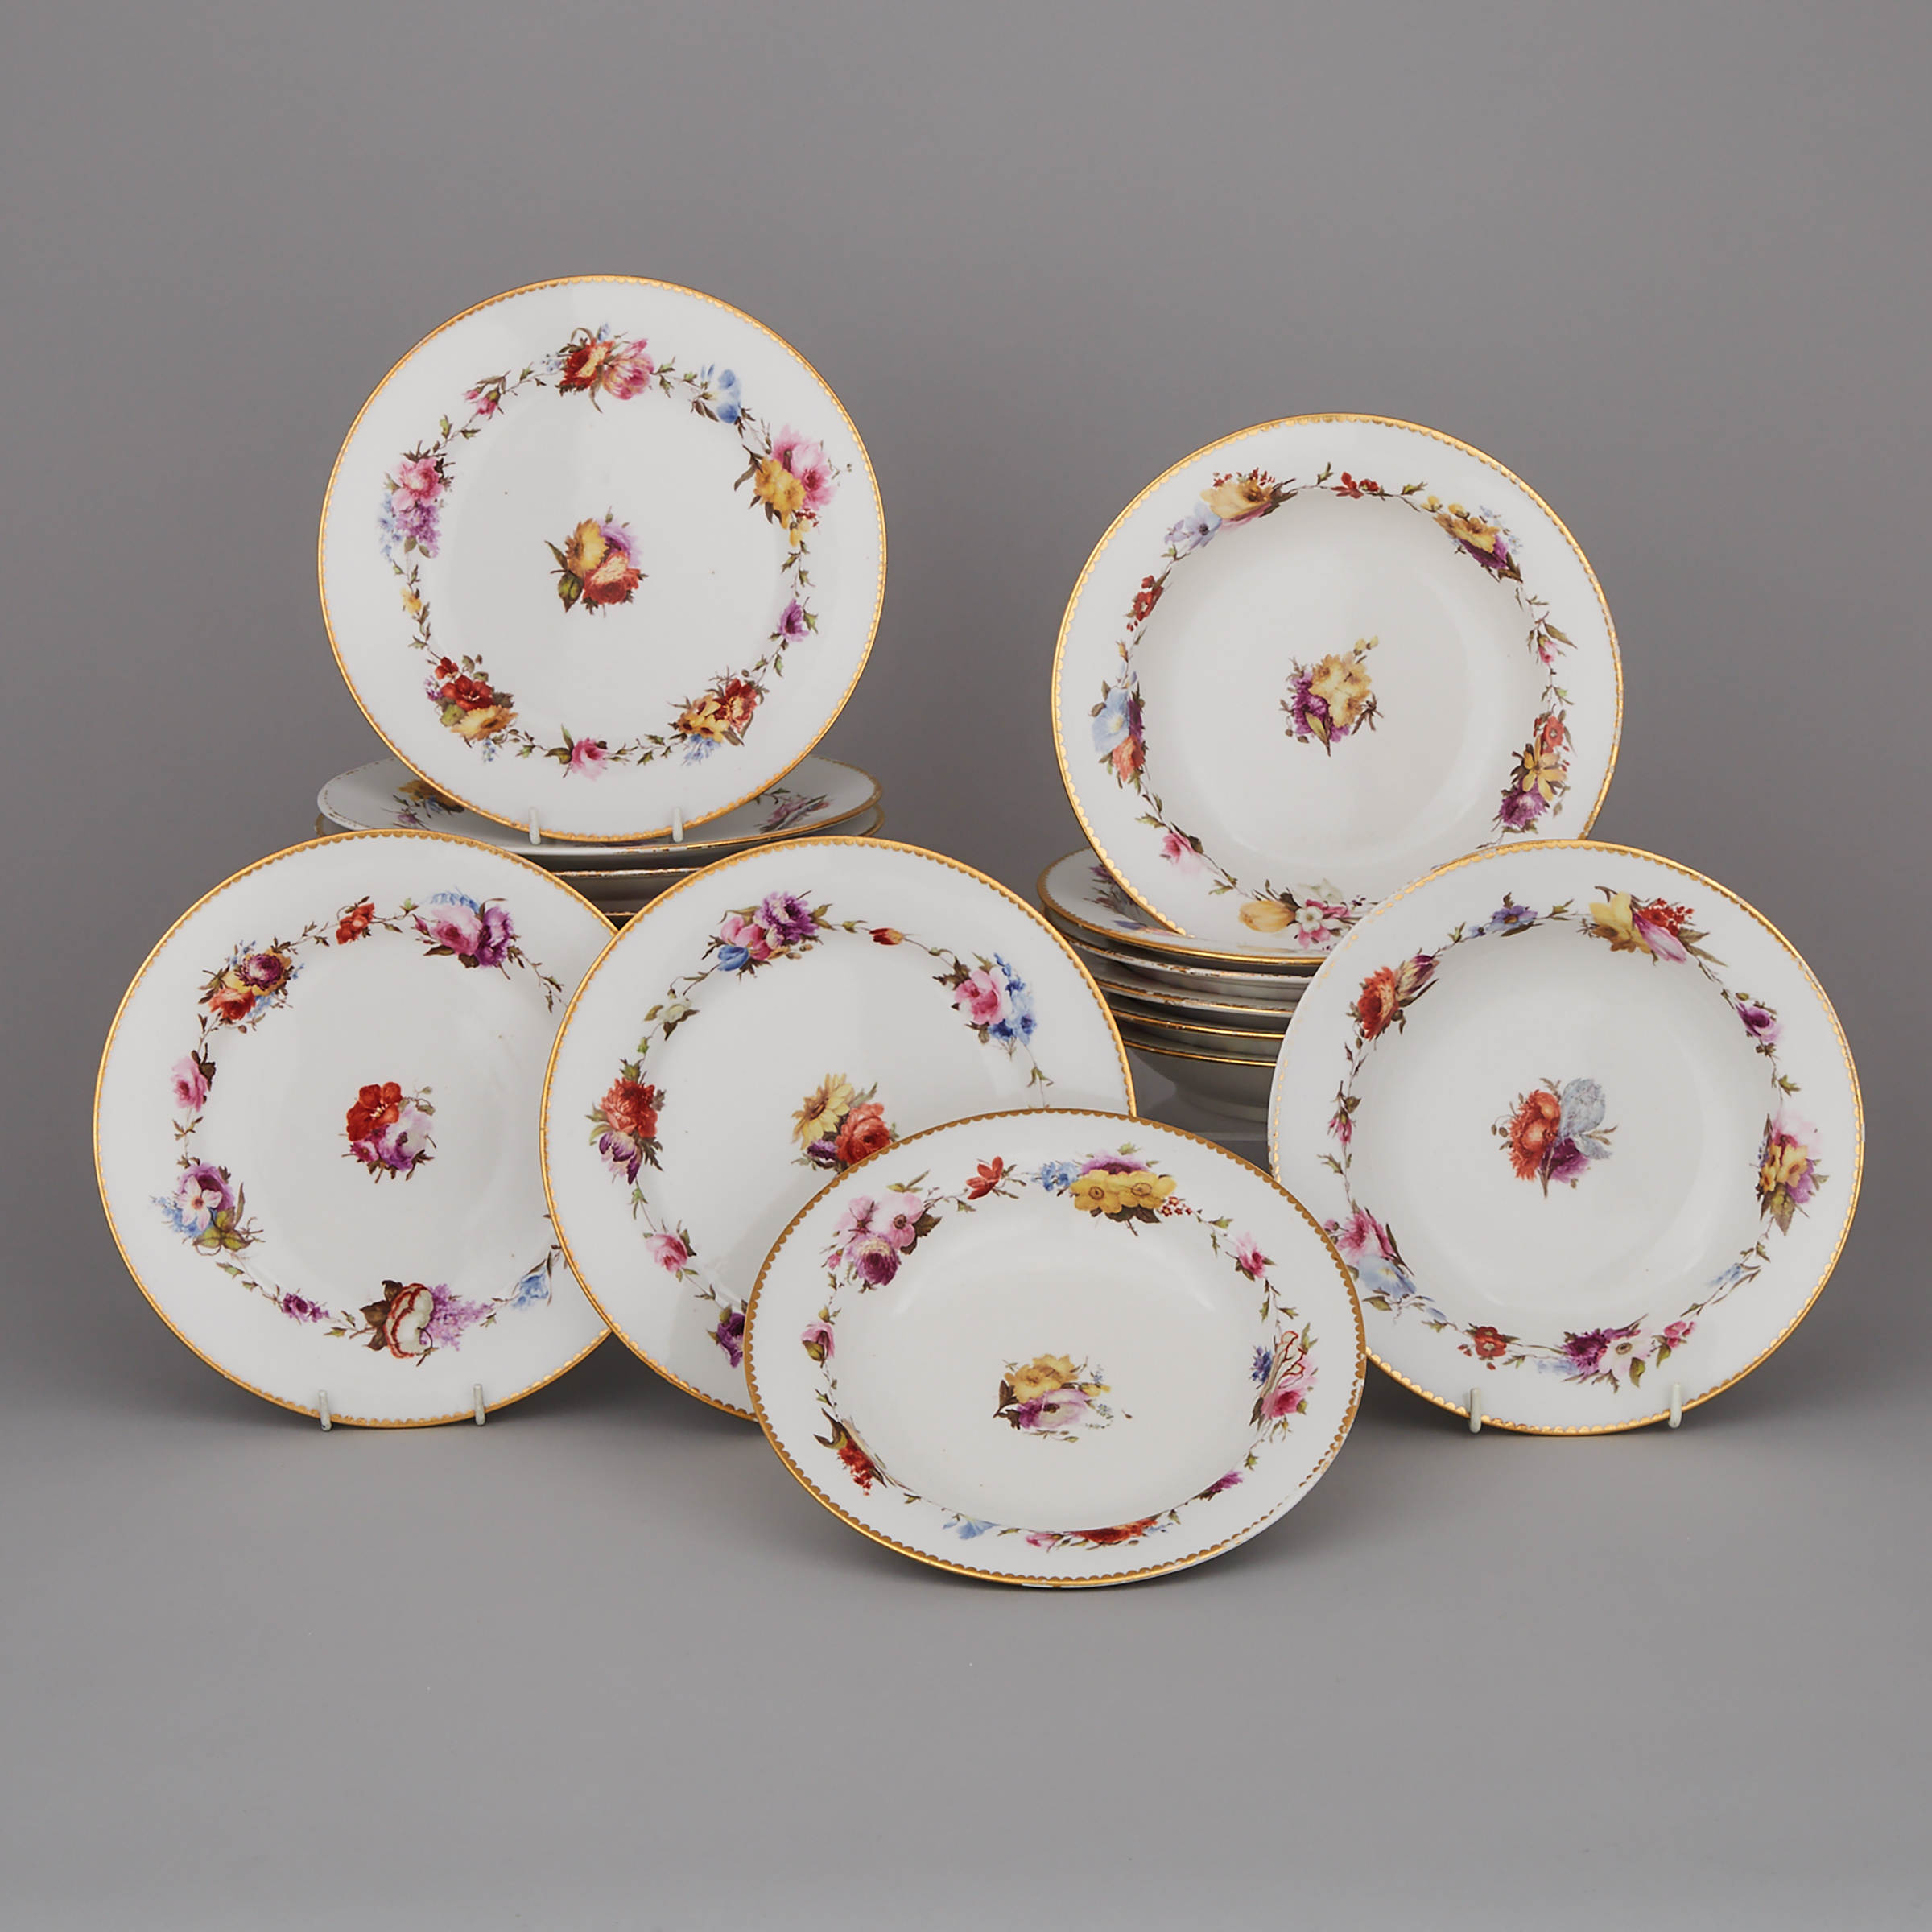 Eight Flight, Barr & Barr Worcester Plates and Eight Soup Plates, c.1815